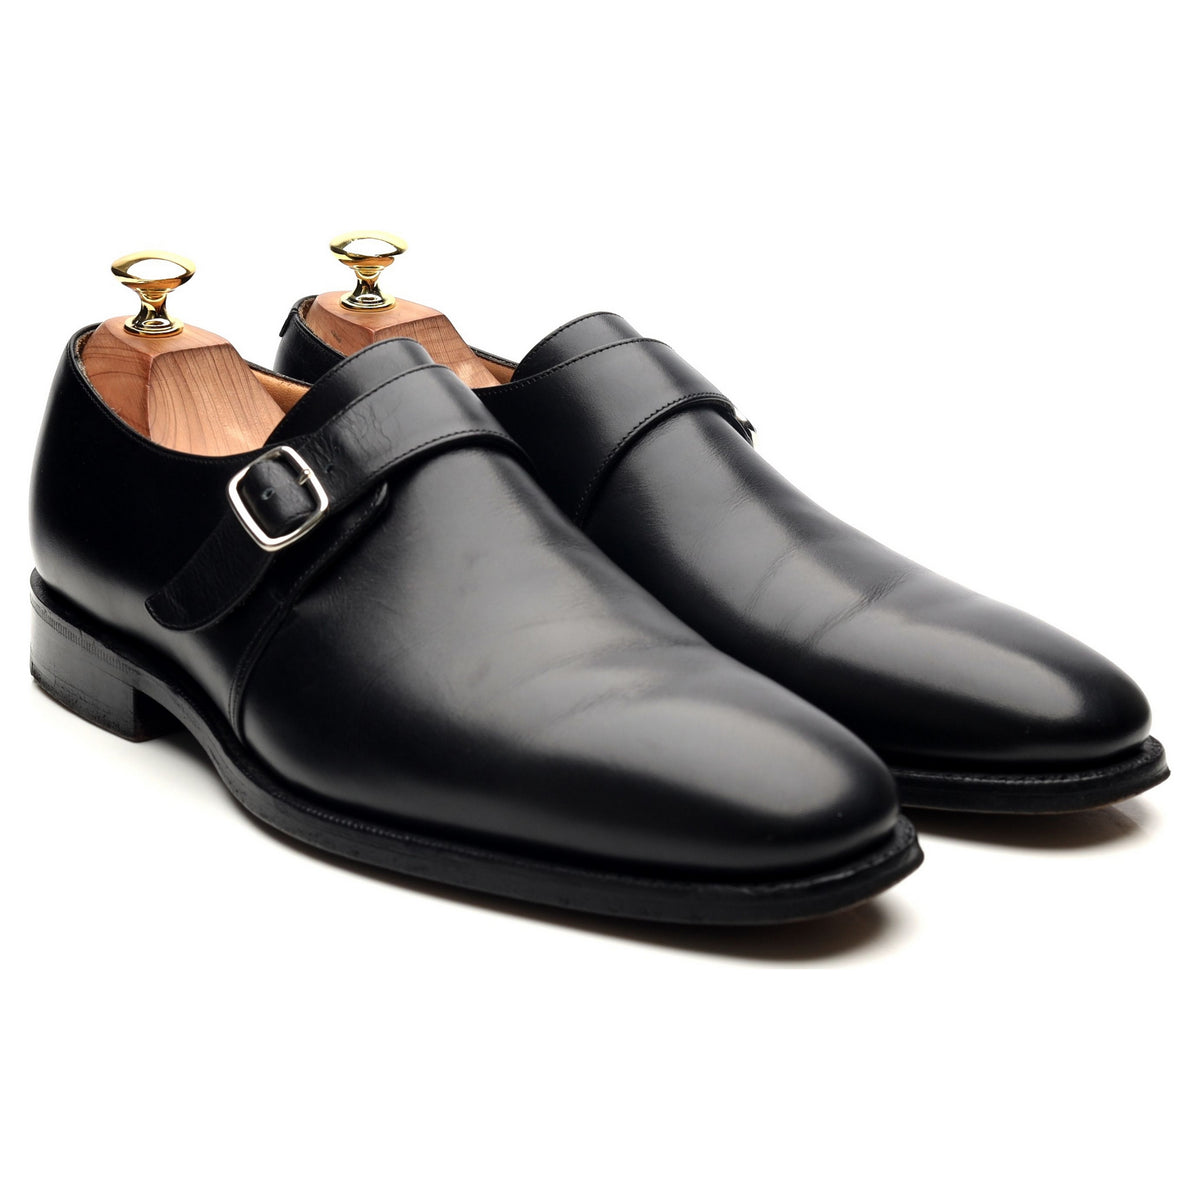 Royal Collection Black Leather Monk Strap UK 8.5 F